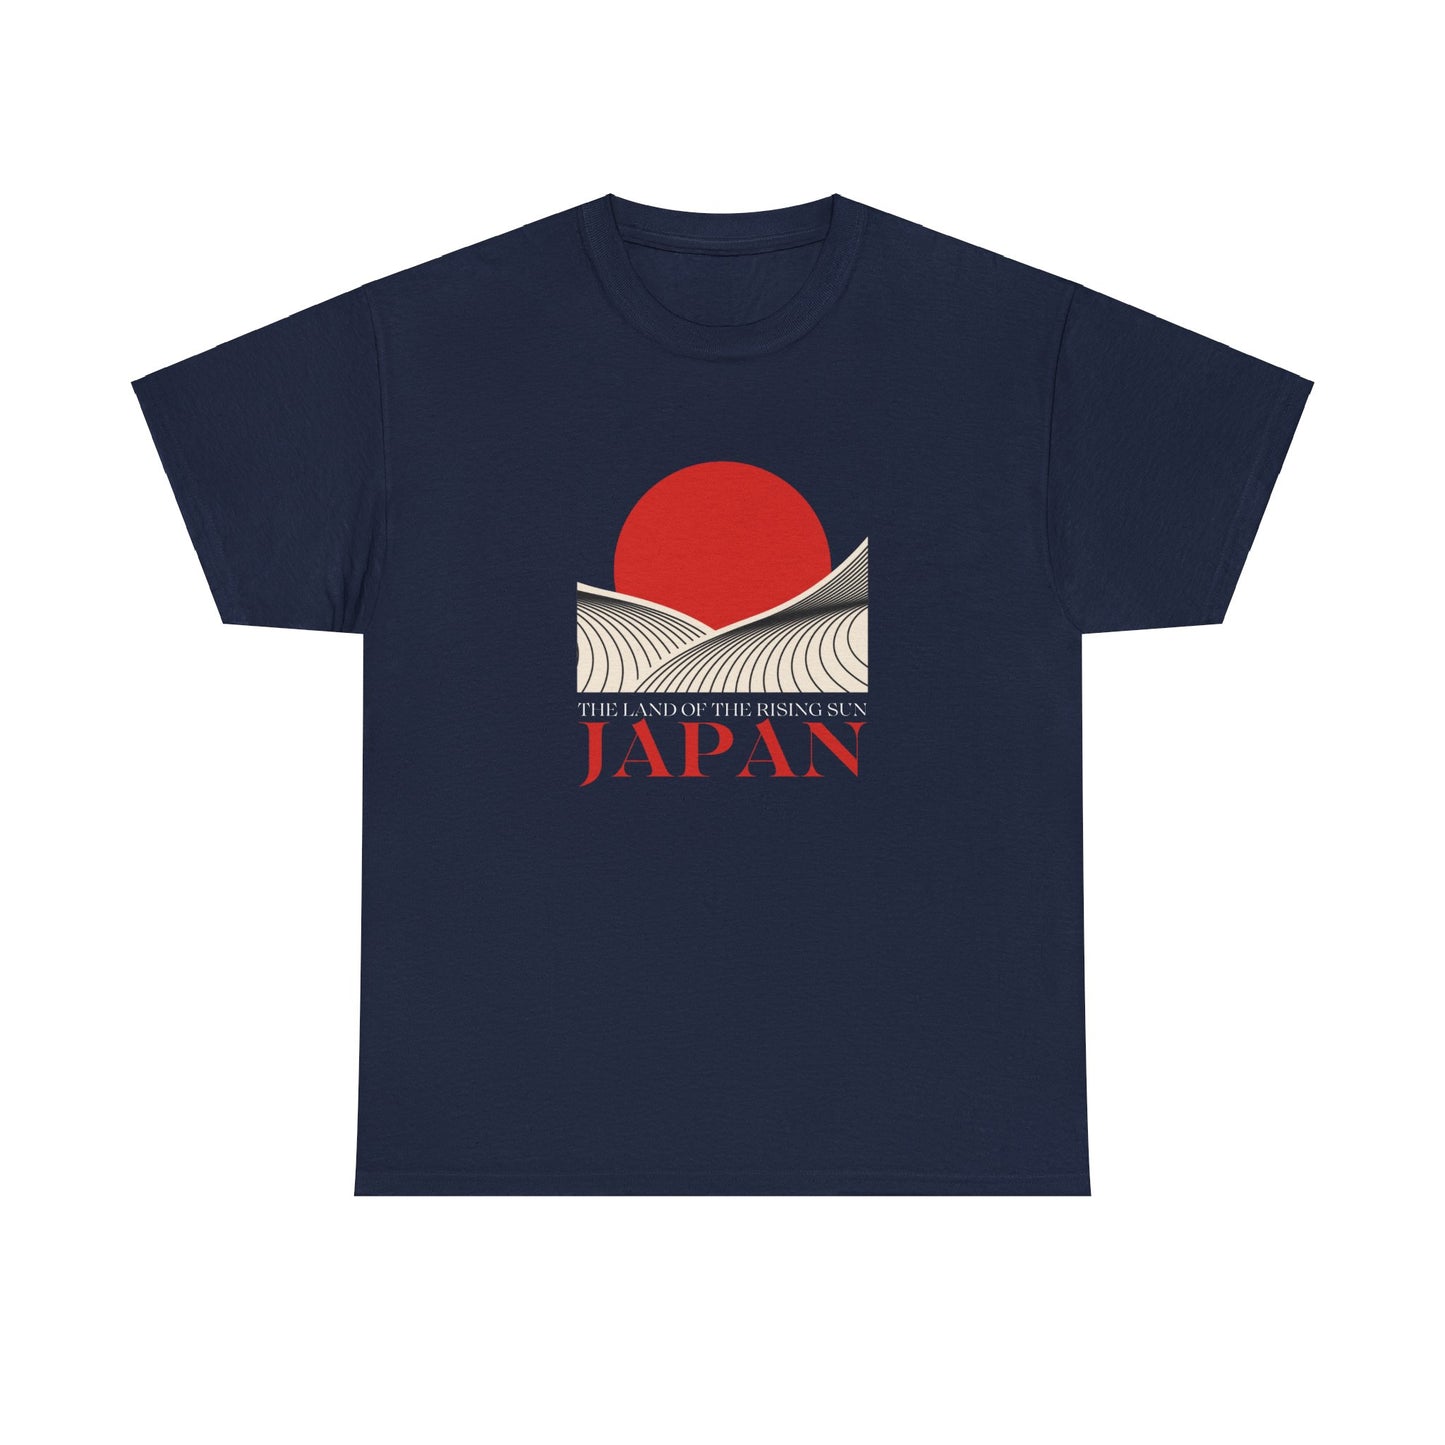 Illustration T-shirt featuring the Rising Sun of Japan - Unisex Heavy Cotton Tee, Ideal for Travelers